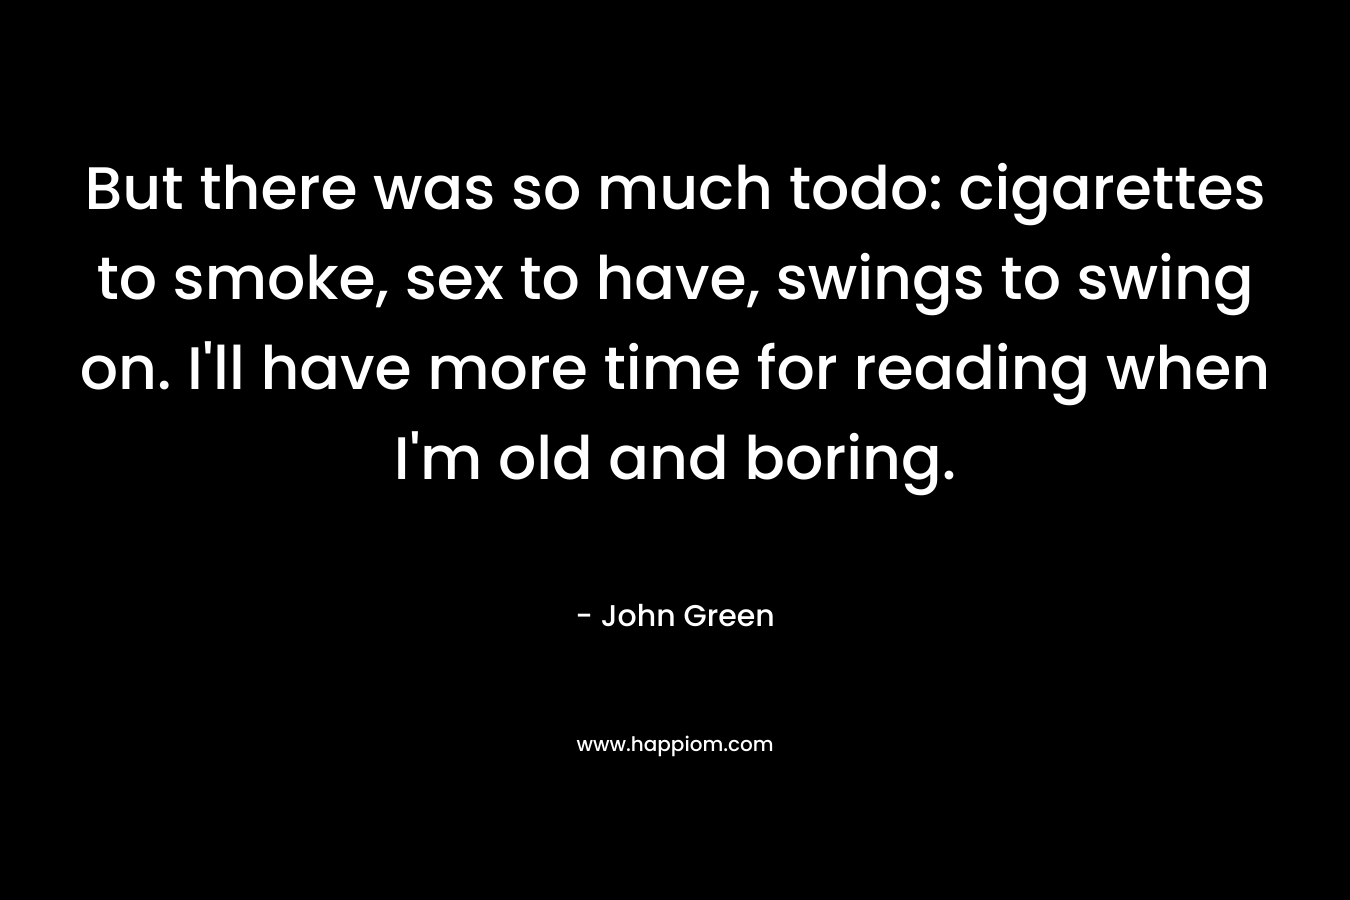 But there was so much todo: cigarettes to smoke, sex to have, swings to swing on. I’ll have more time for reading when I’m old and boring. – John Green